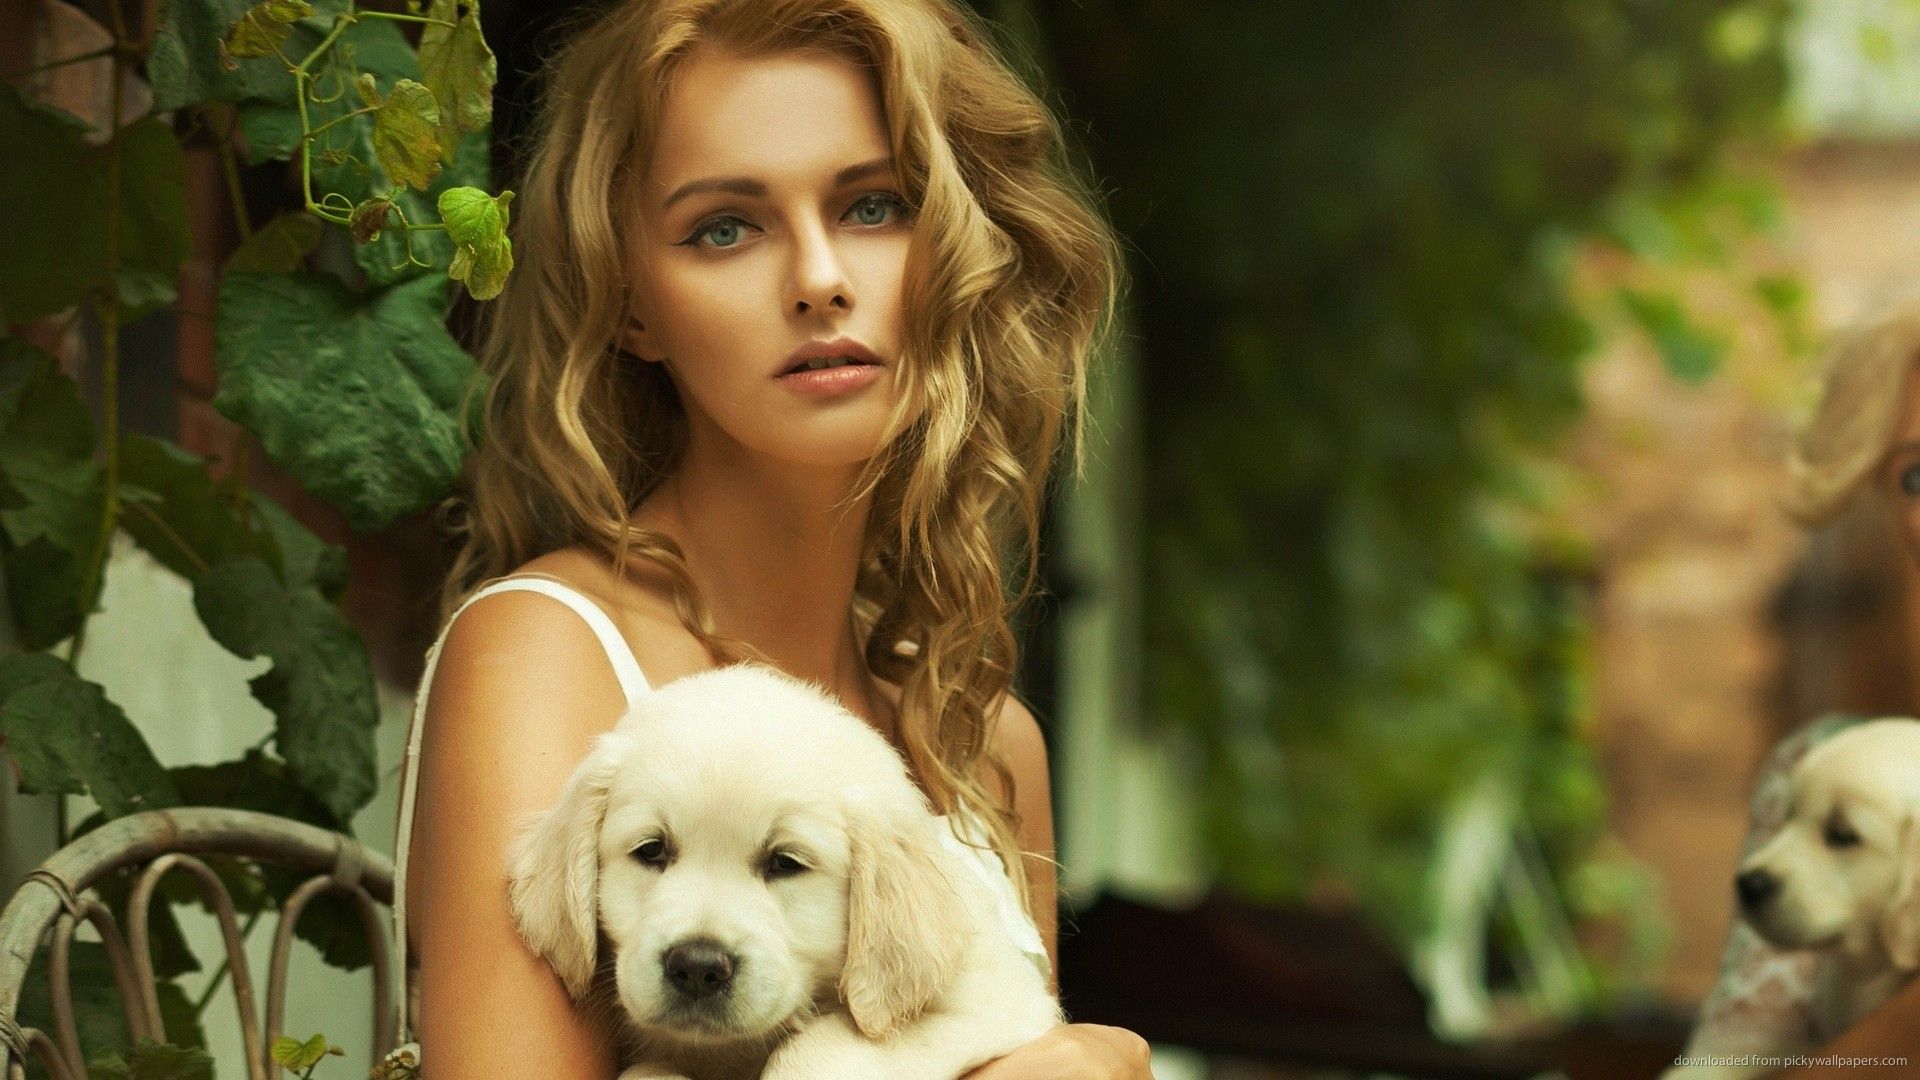 Girl and dog wallpapers and images wallpapers pictures photos ...